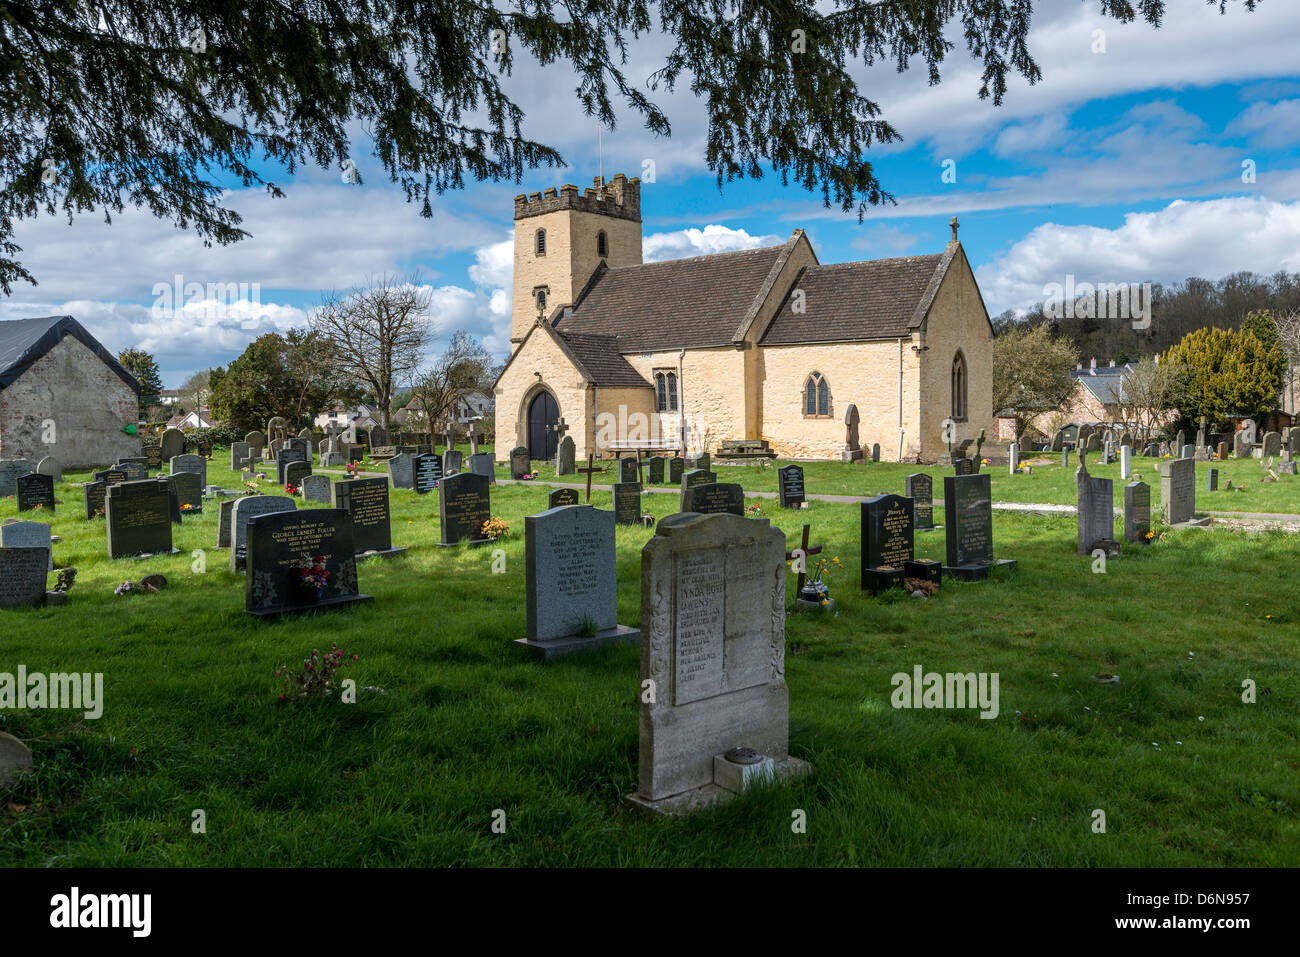 PARISH CHURCH OF ST MARY AT PORTSKEWETT MONMOUTHSHIRE ON CALDICOT LEVELS ON THE SEVERN ESTUARY. Monmouthshire Wales UK Stock Photo